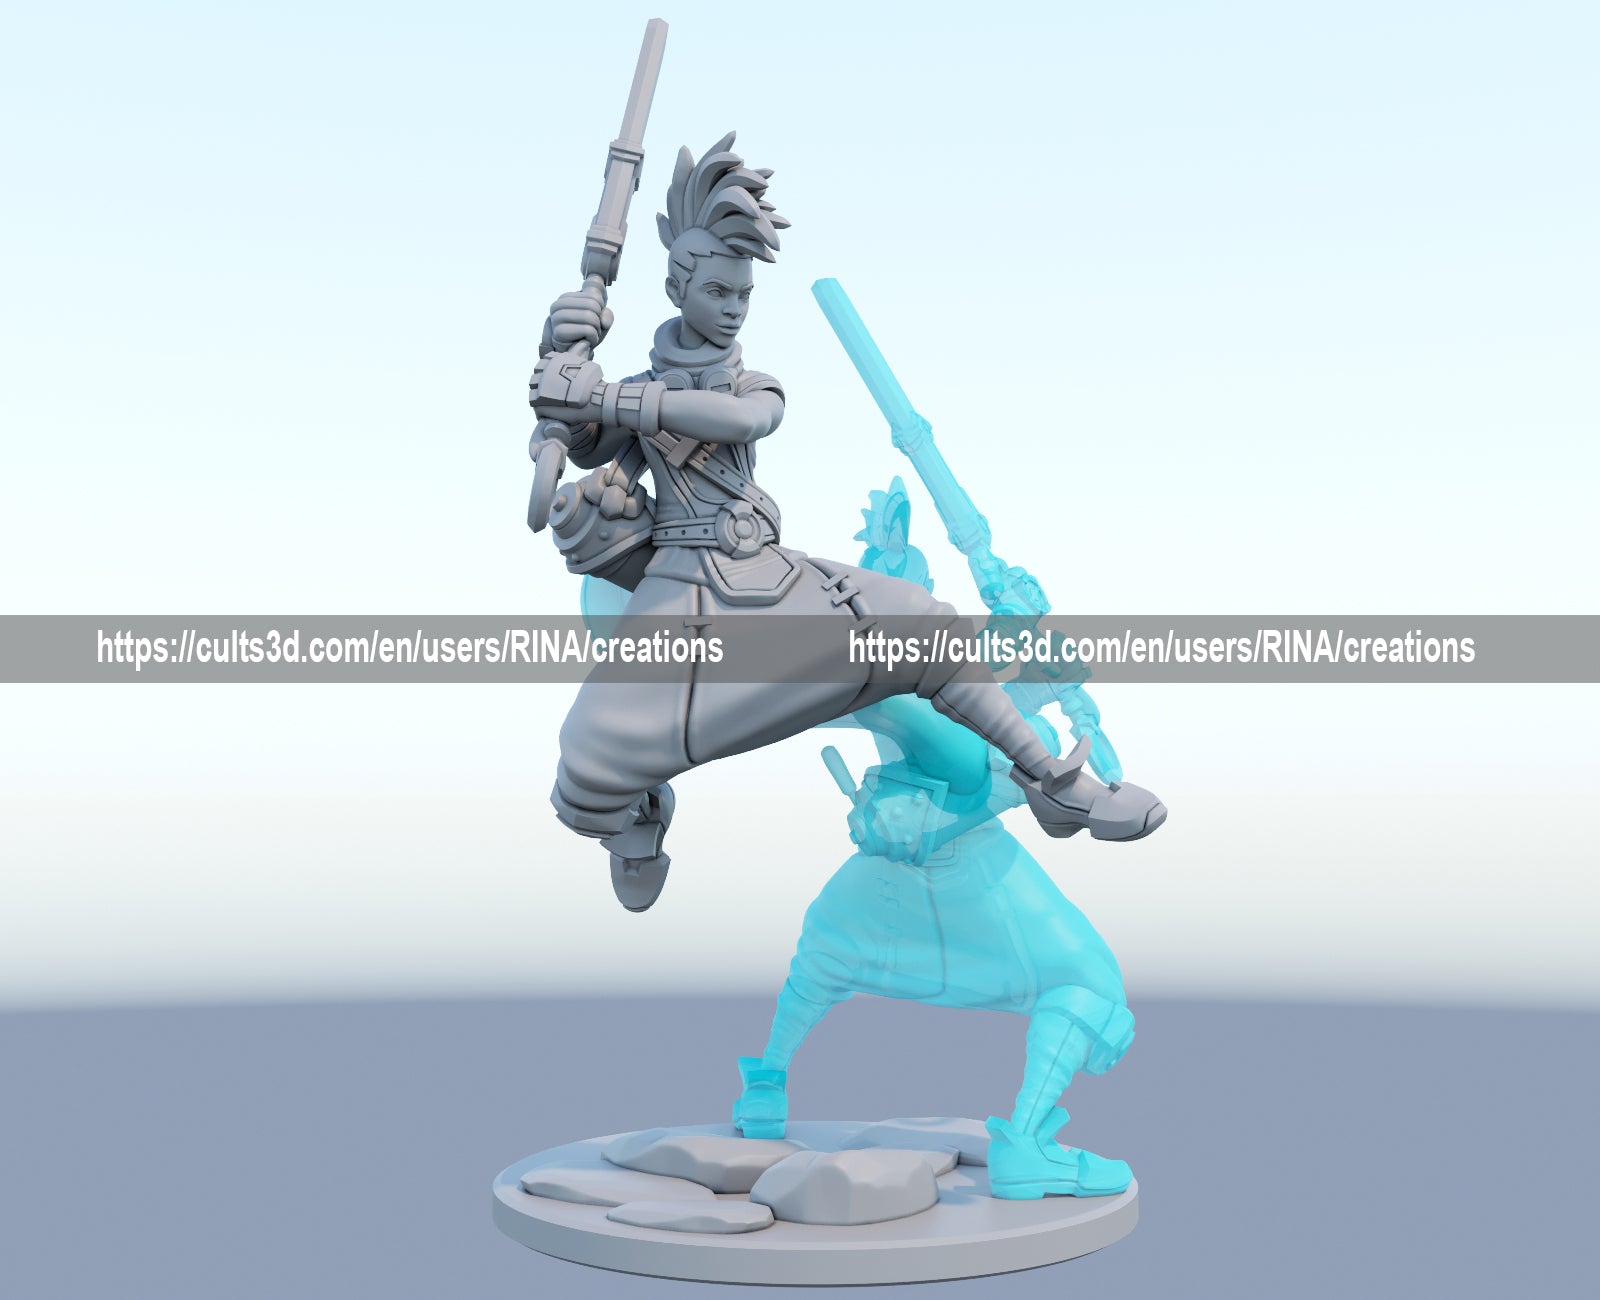 Ekko 3D-printed League of Legends champion figure. Decorate your gaming setup or home with your favorite League of Legends champion! Choose between the unpainted version, perfect for you to paint yourself, or the hand-painted version by a professional painter. Order your figure today!